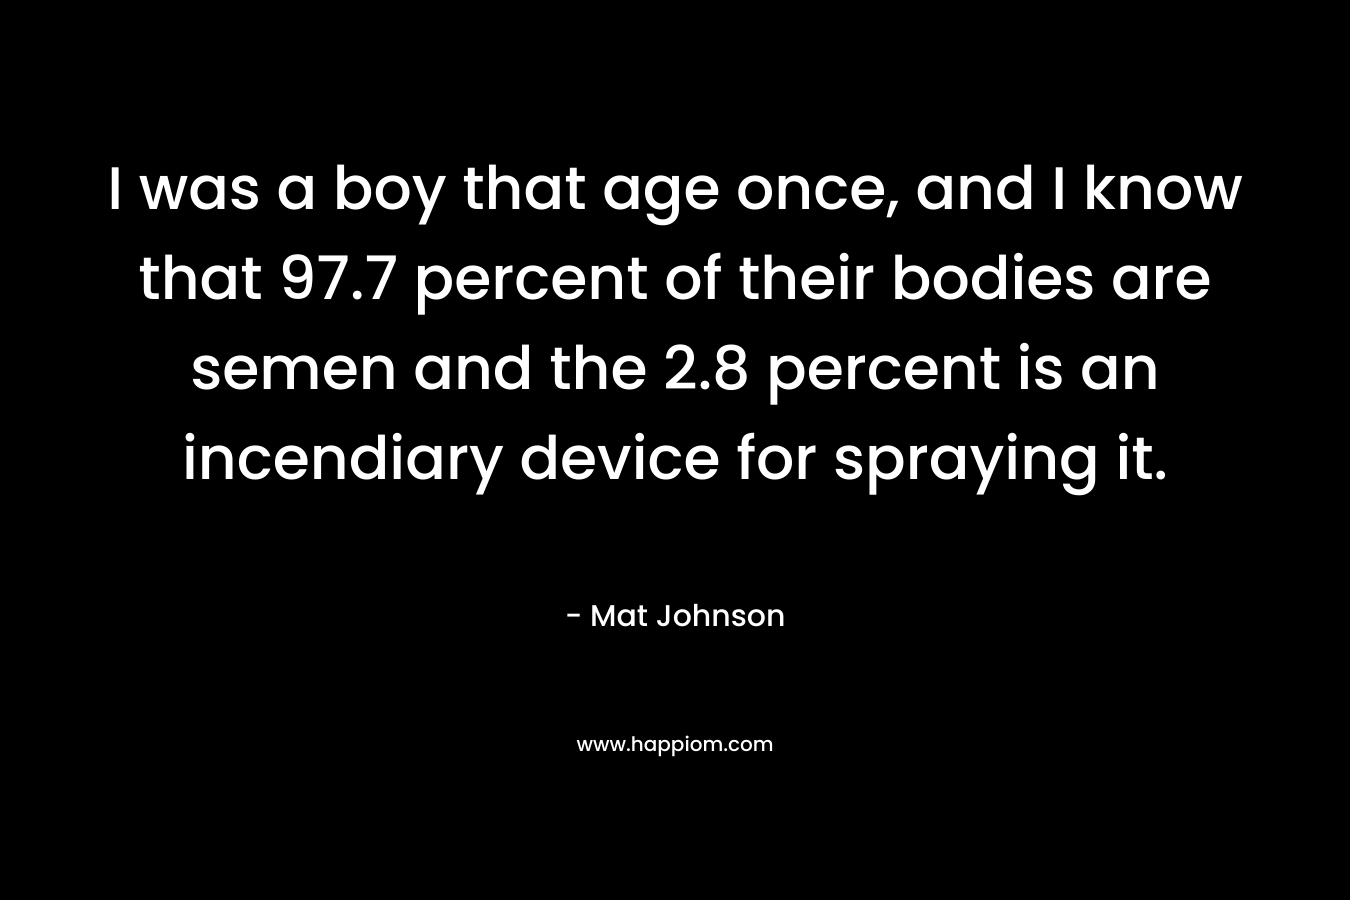 I was a boy that age once, and I know that 97.7 percent of their bodies are semen and the 2.8 percent is an incendiary device for spraying it. – Mat Johnson